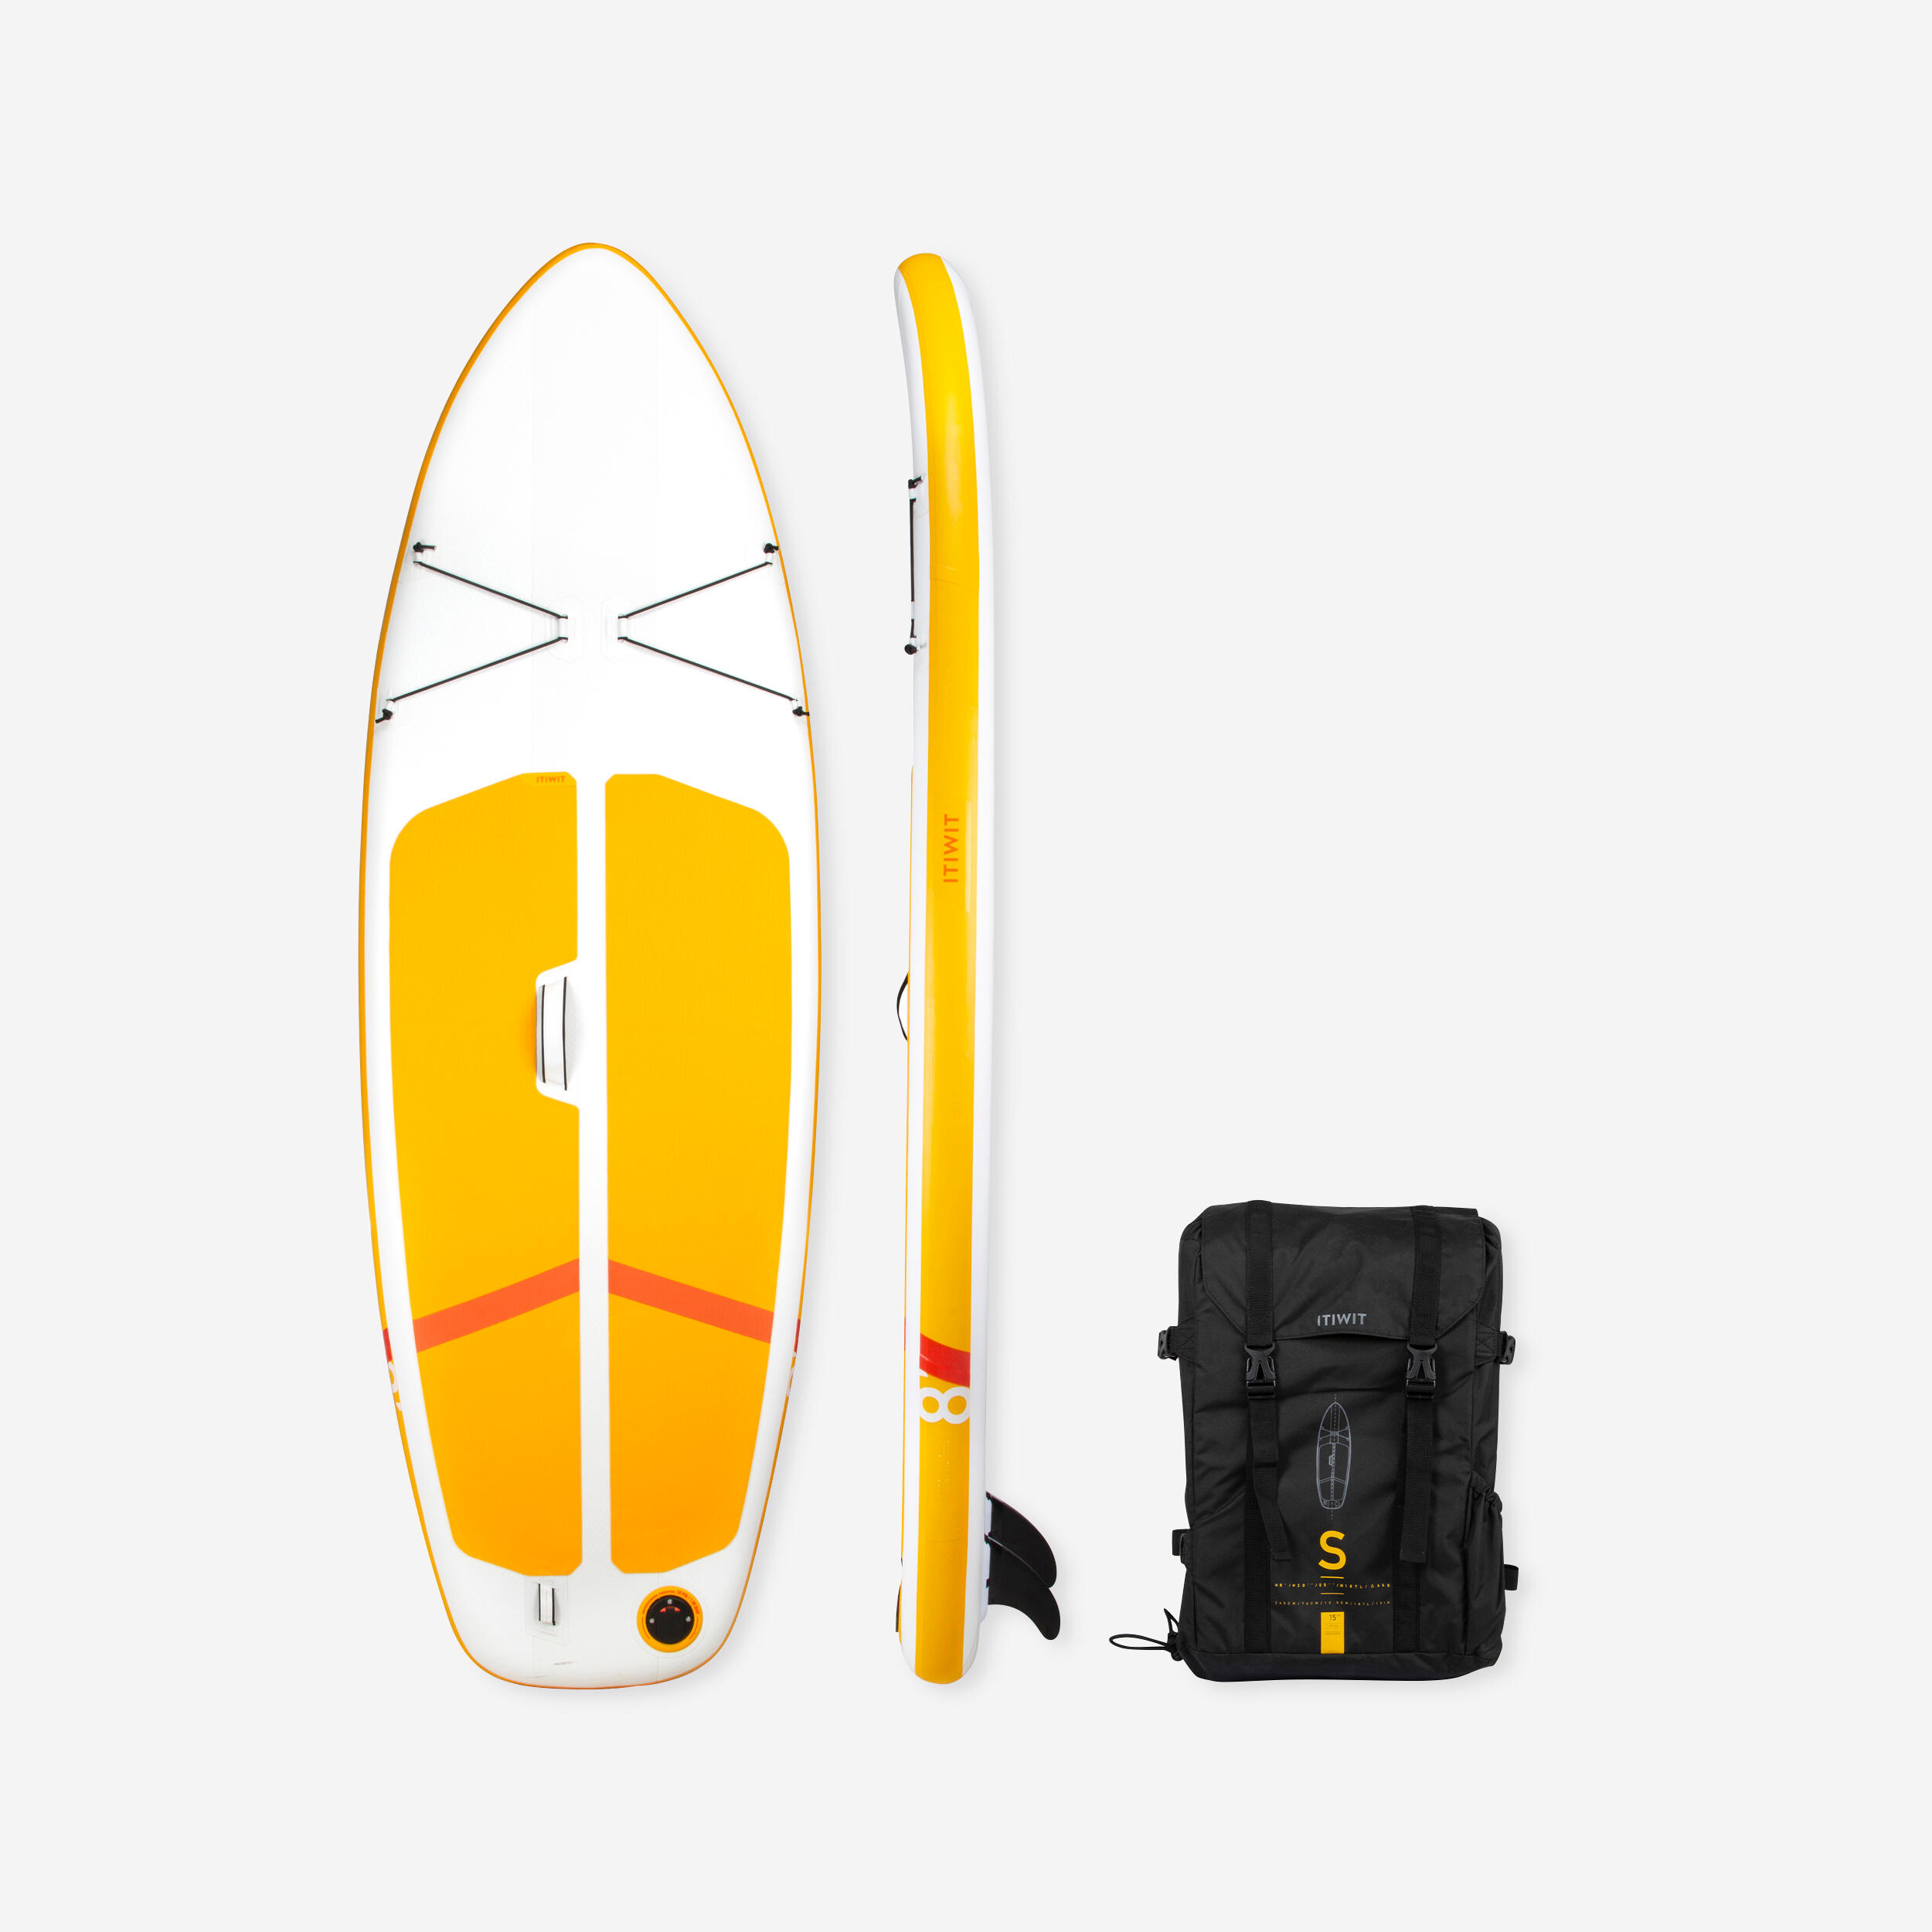 Inflatable Paddle Boards UK - Blow Up Boards